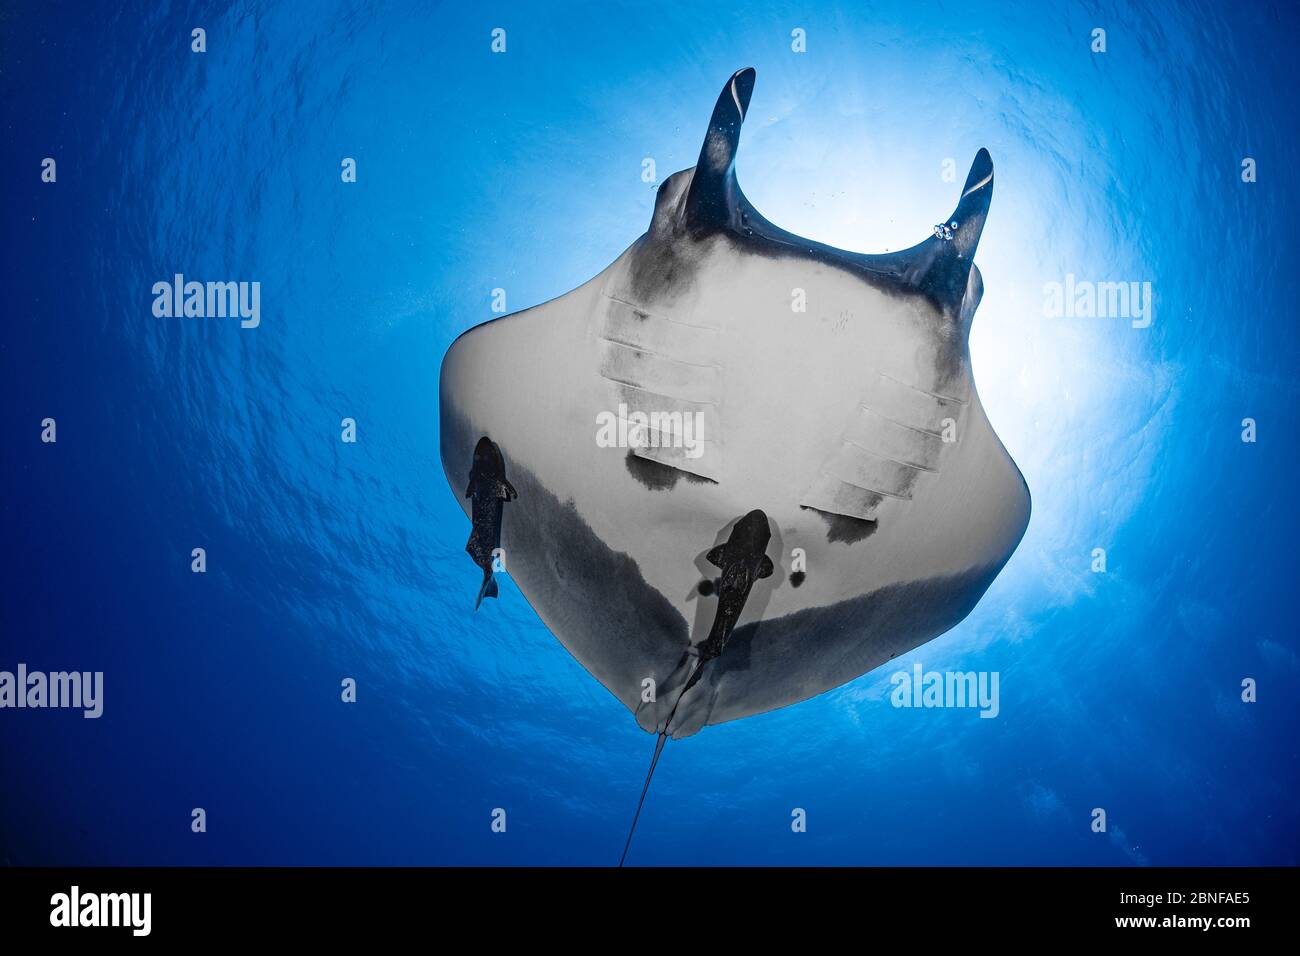 Giant manta from below Stock Photo